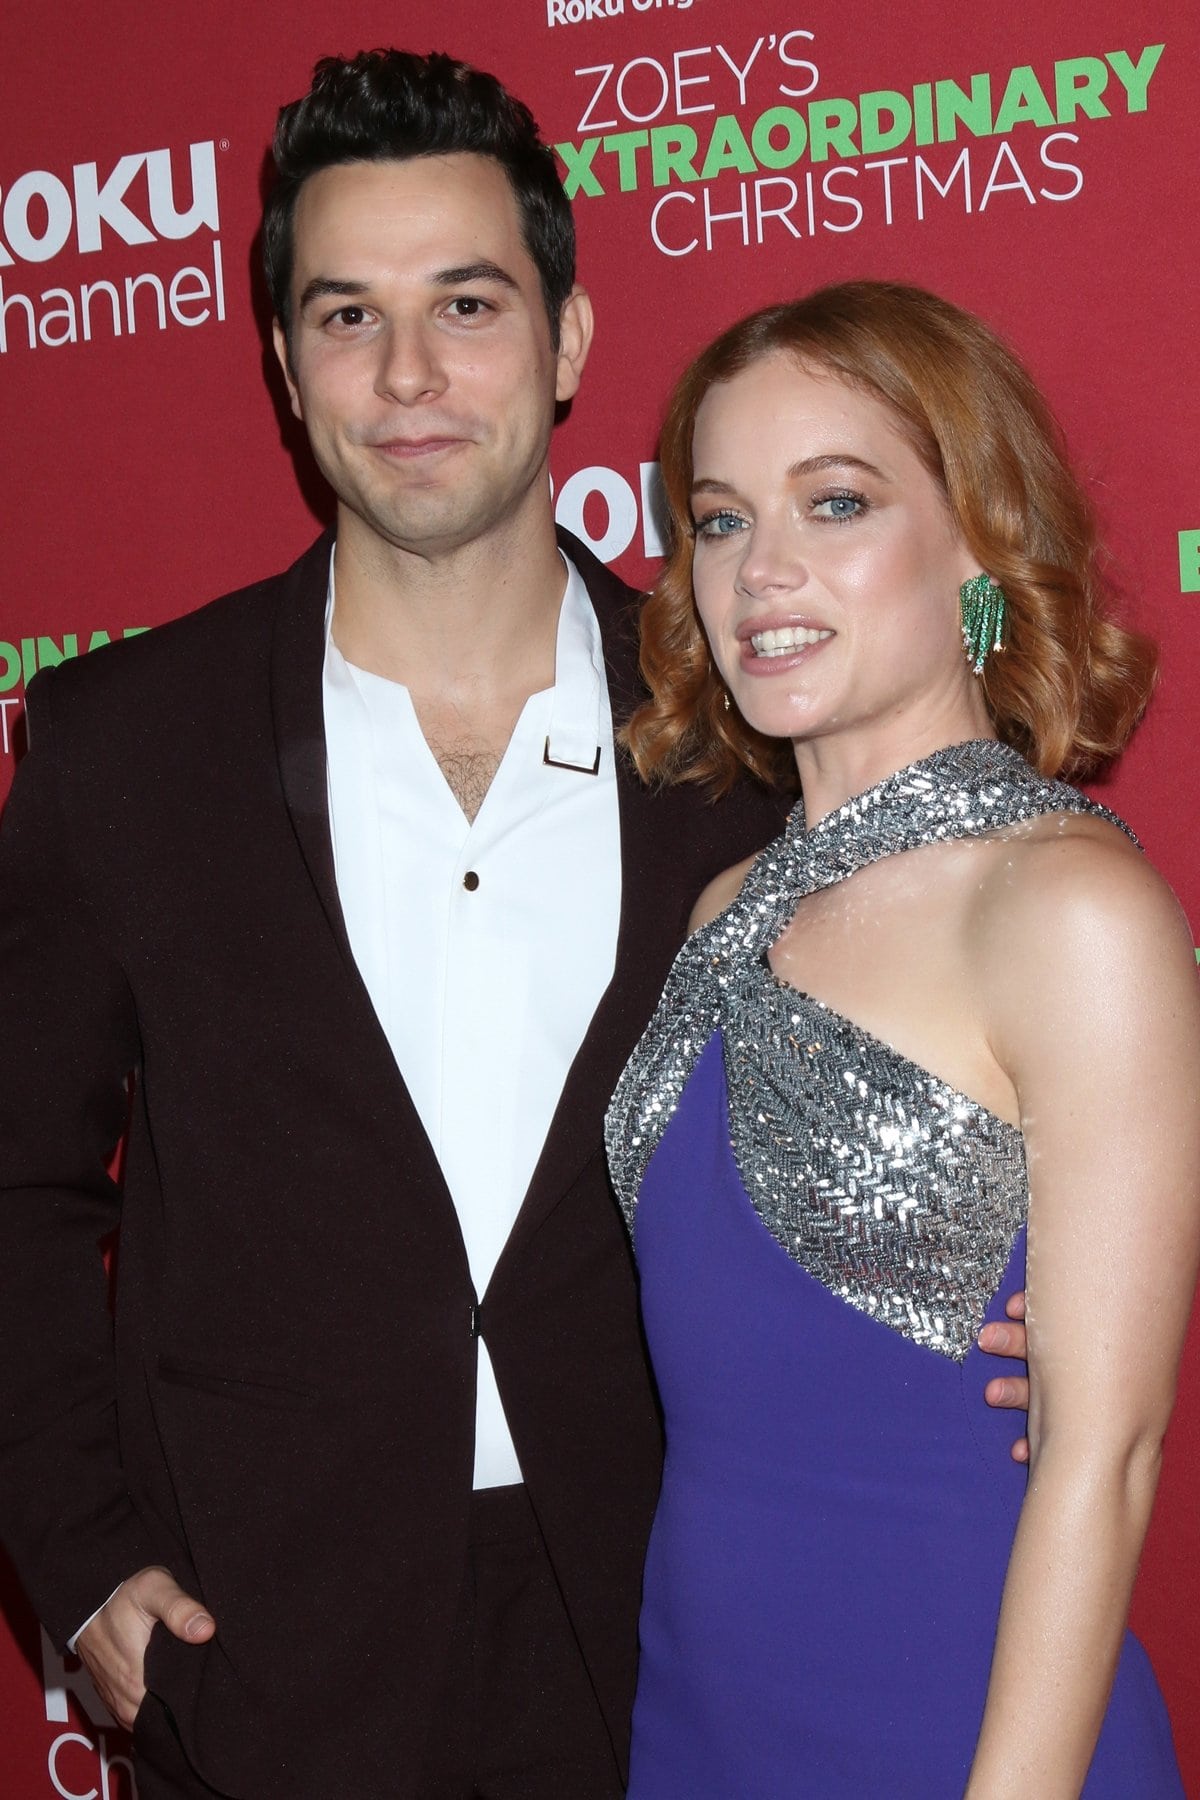 Jane Levy plays Zoey Clarke and Skylar Astin portrays her boyfriend Max Richman in the popular American musical comedy-drama television series Zoey's Extraordinary Playlist